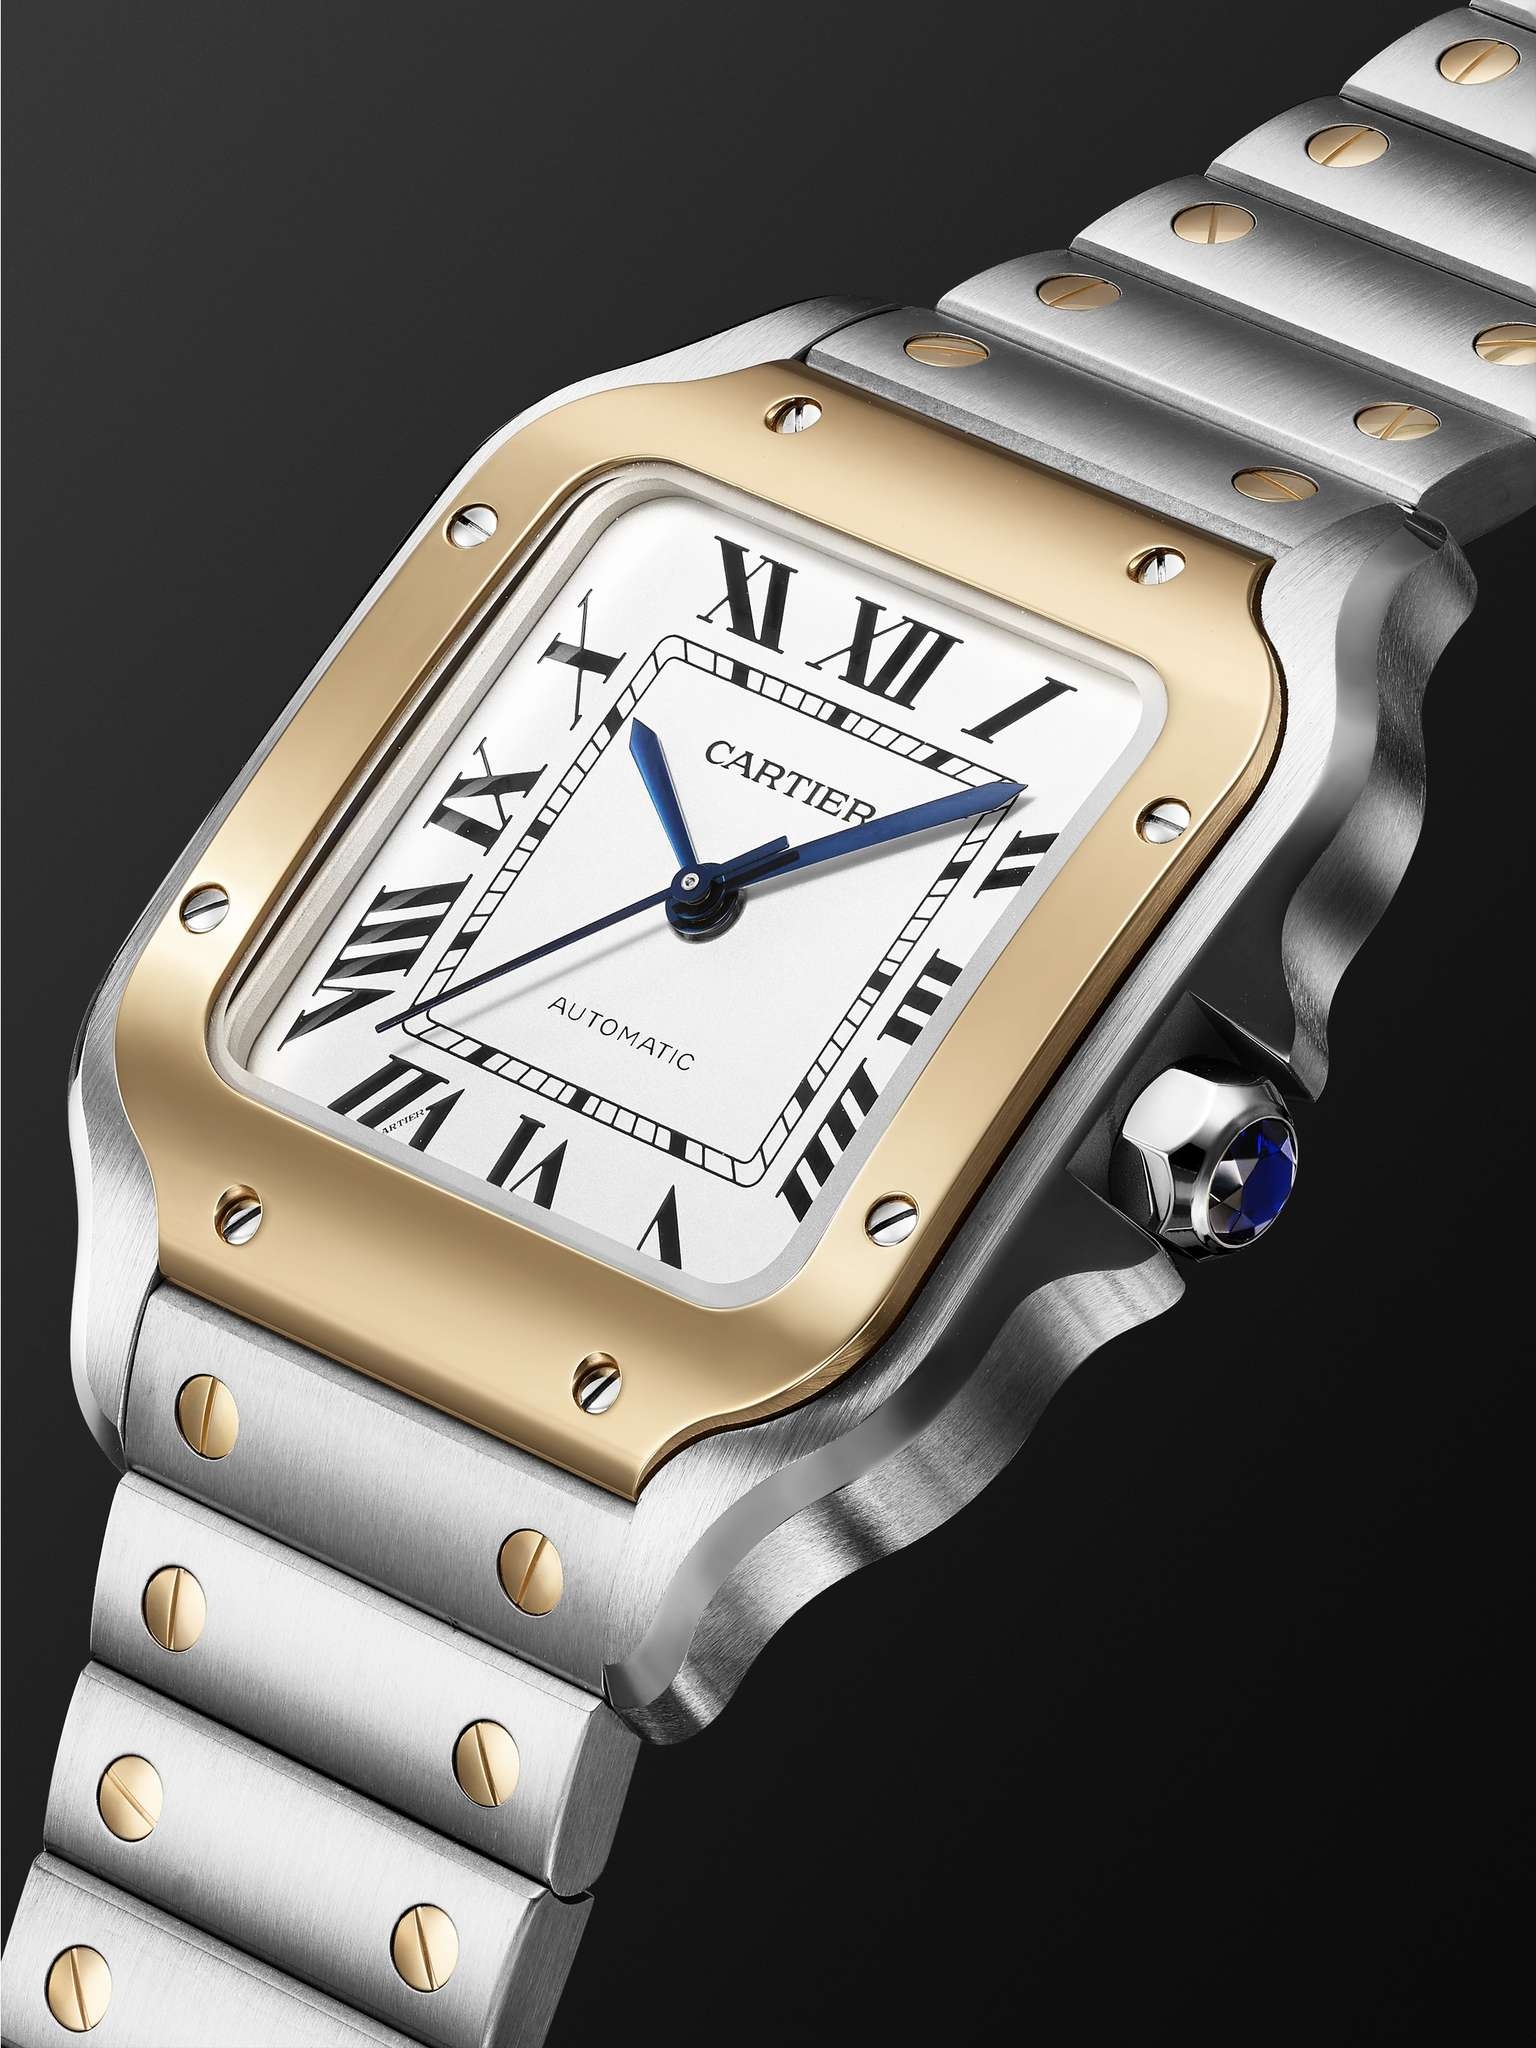 Santos de Cartier Automatic 35.1mm Interchangeable 18-Karat Gold, Stainless Steel and Leather Watch, - 3